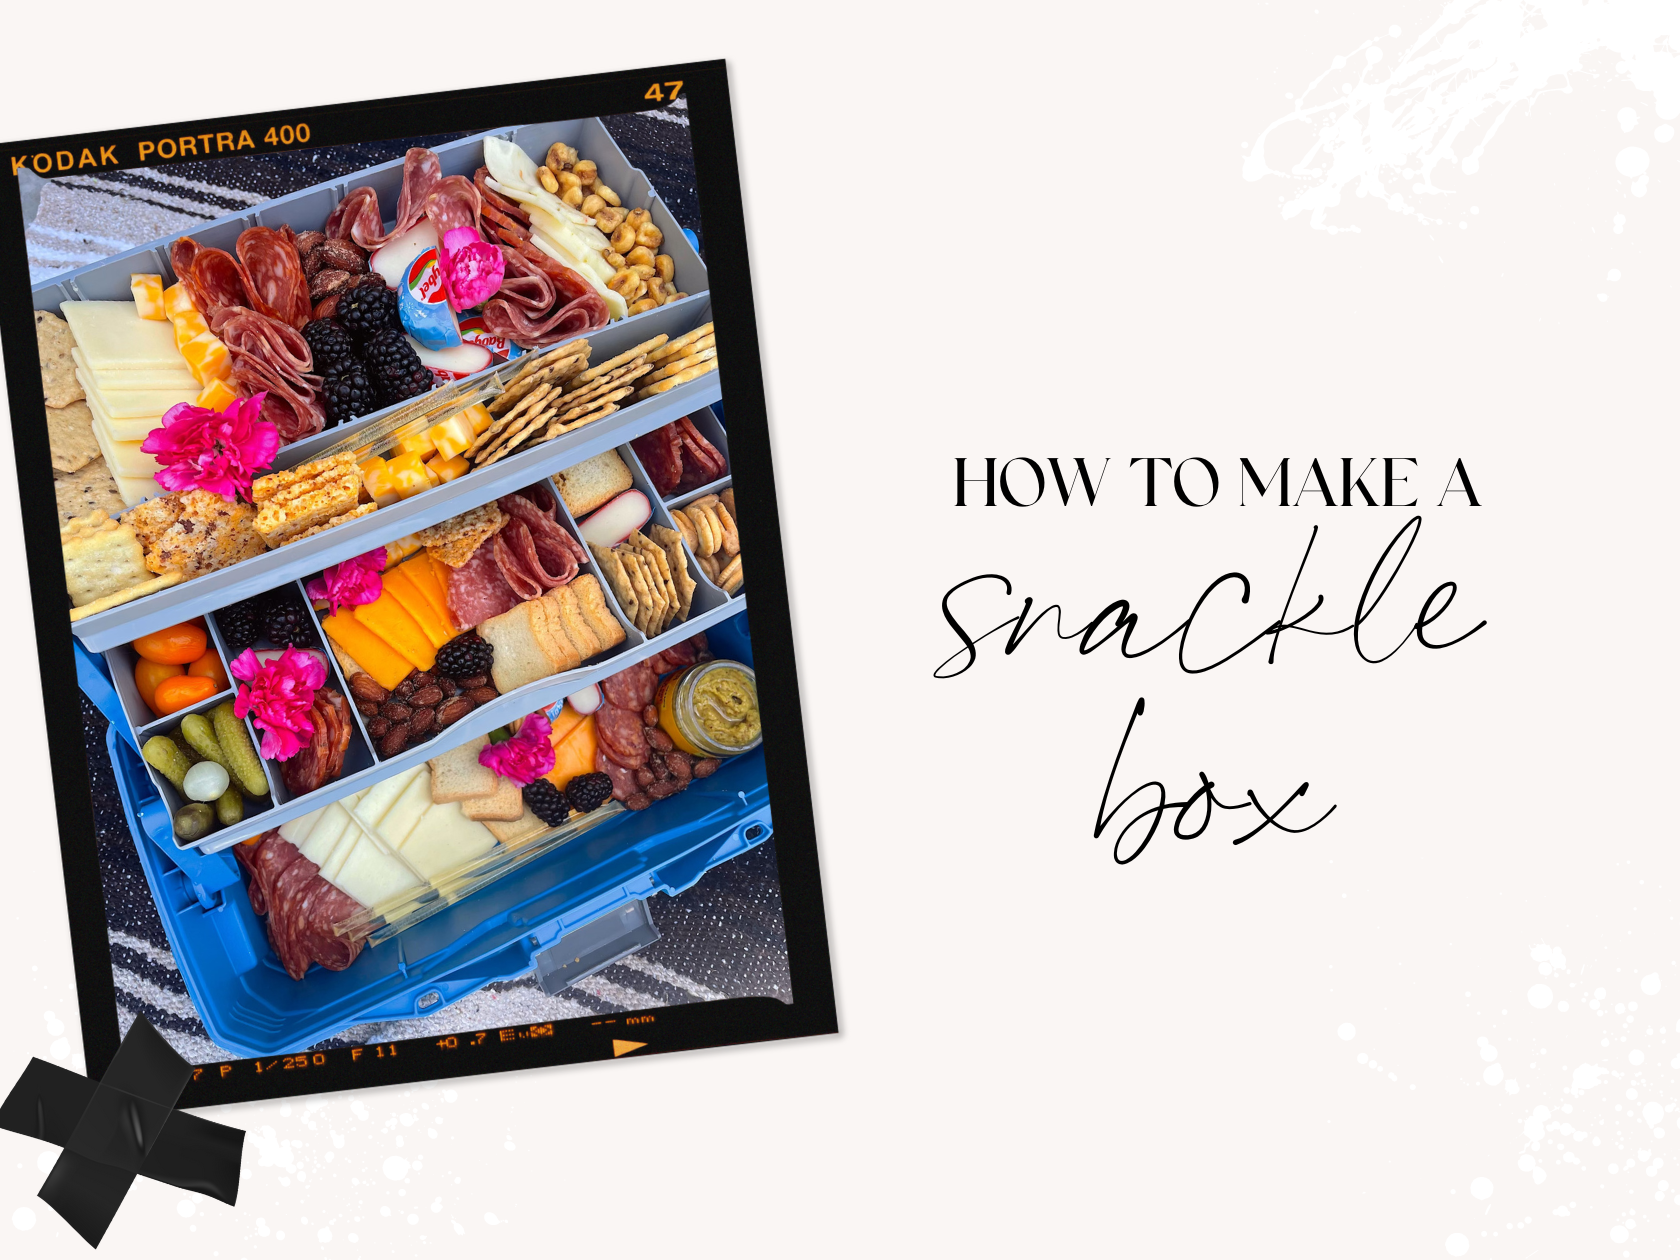 Click now to browse Snackle Box - On The Go Charcuterie/Snack Box Tips -  Small Gestures Matter, snackle box container 